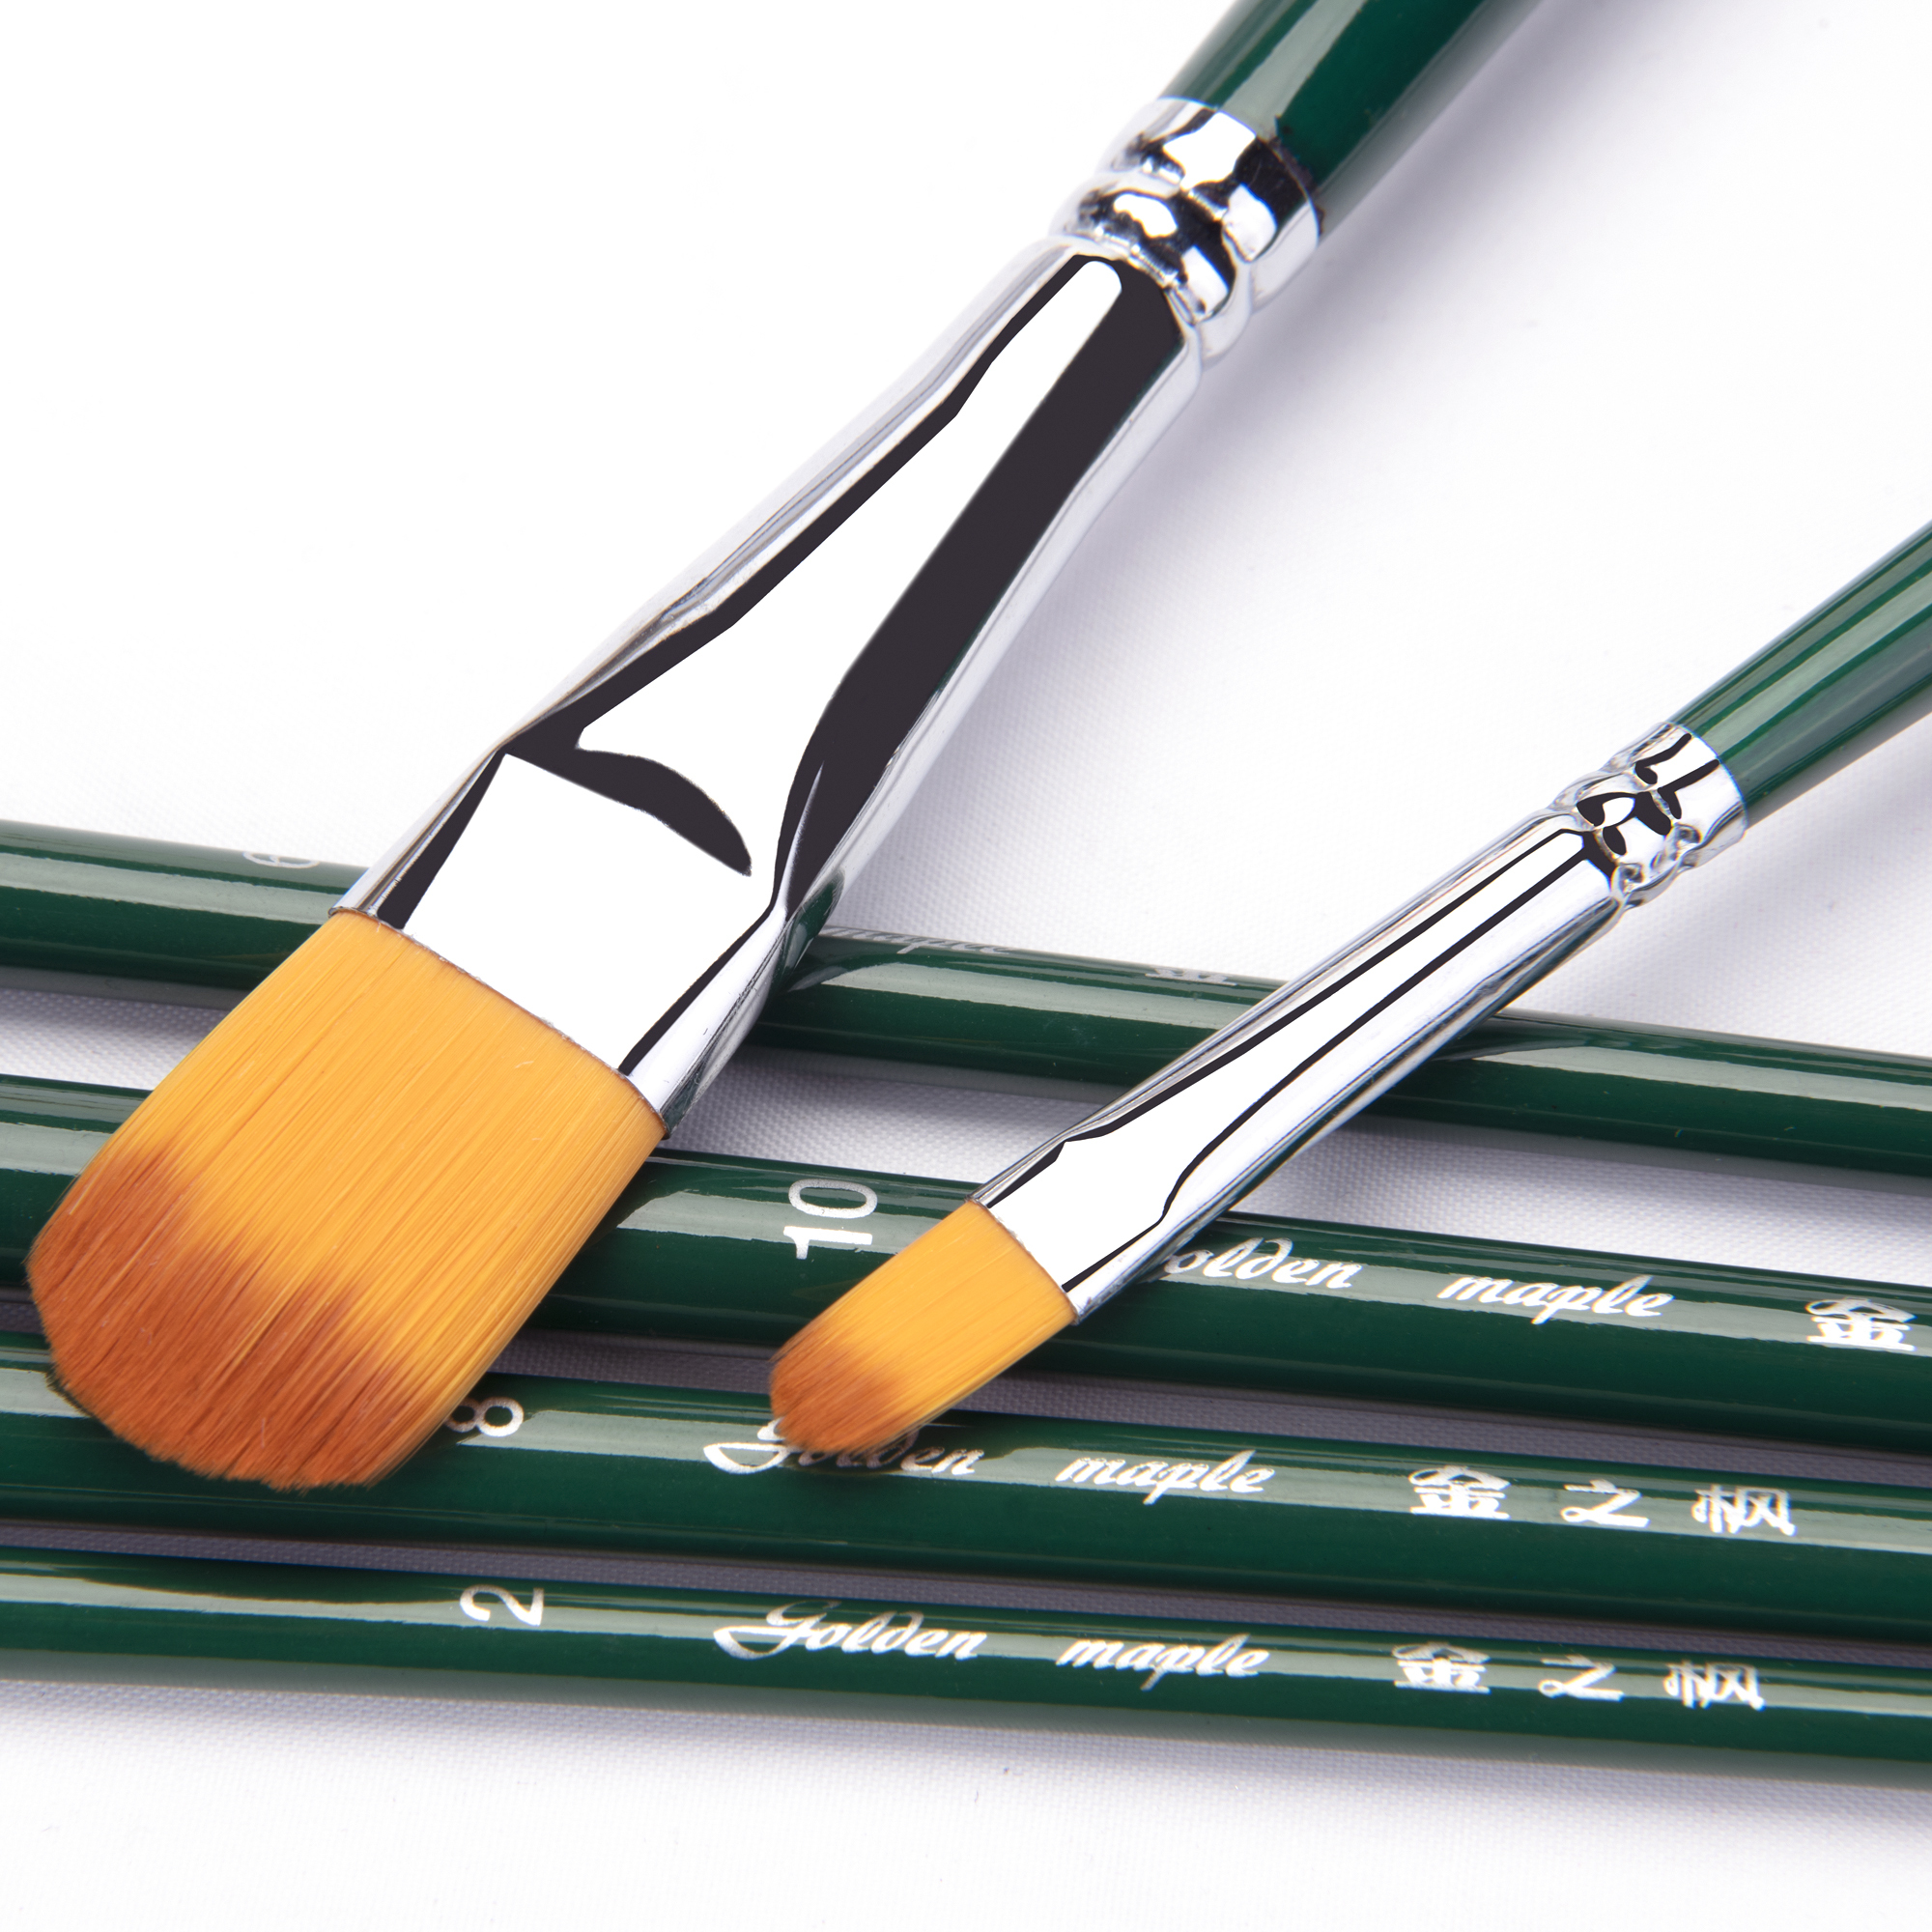 What is the best brand of acrylic paint brushes